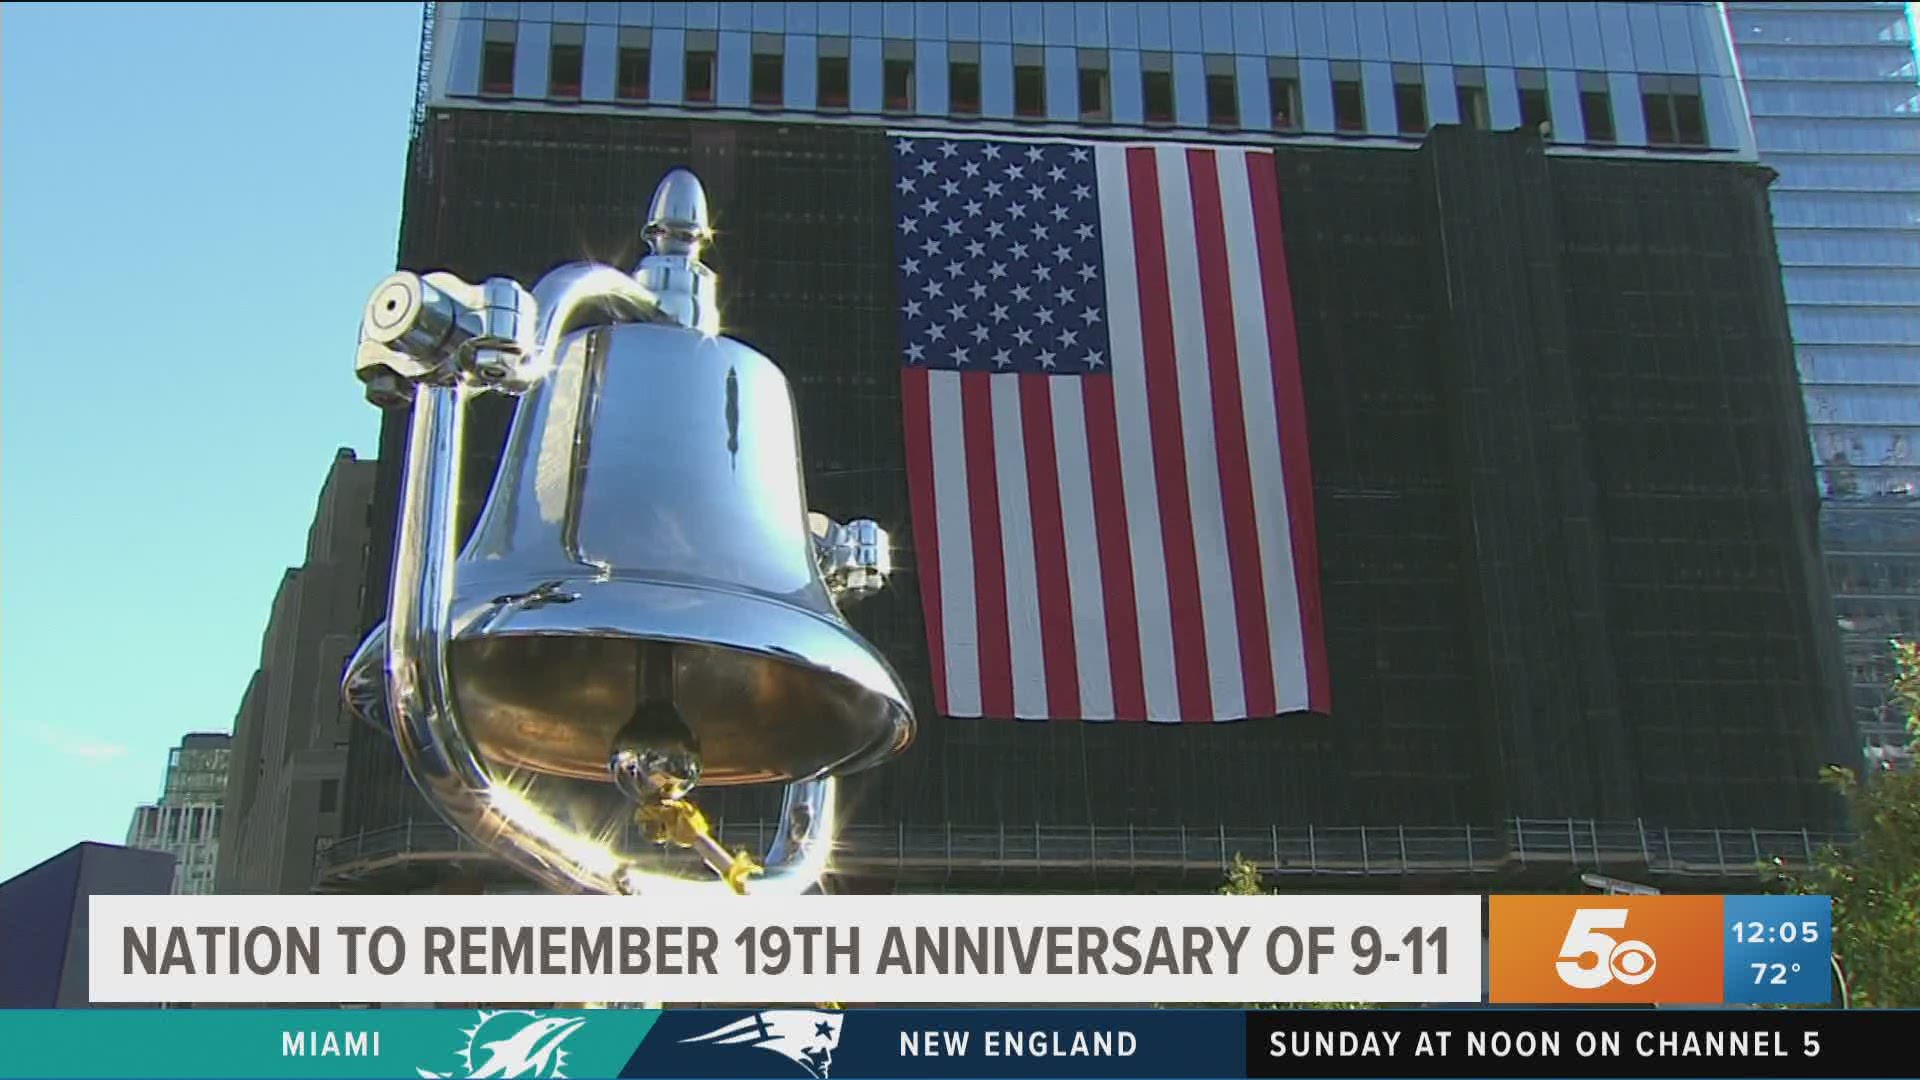 A ceremony at ground zero will take place to mark the 19th anniversary of the Sept. 11 terrorist attacks.